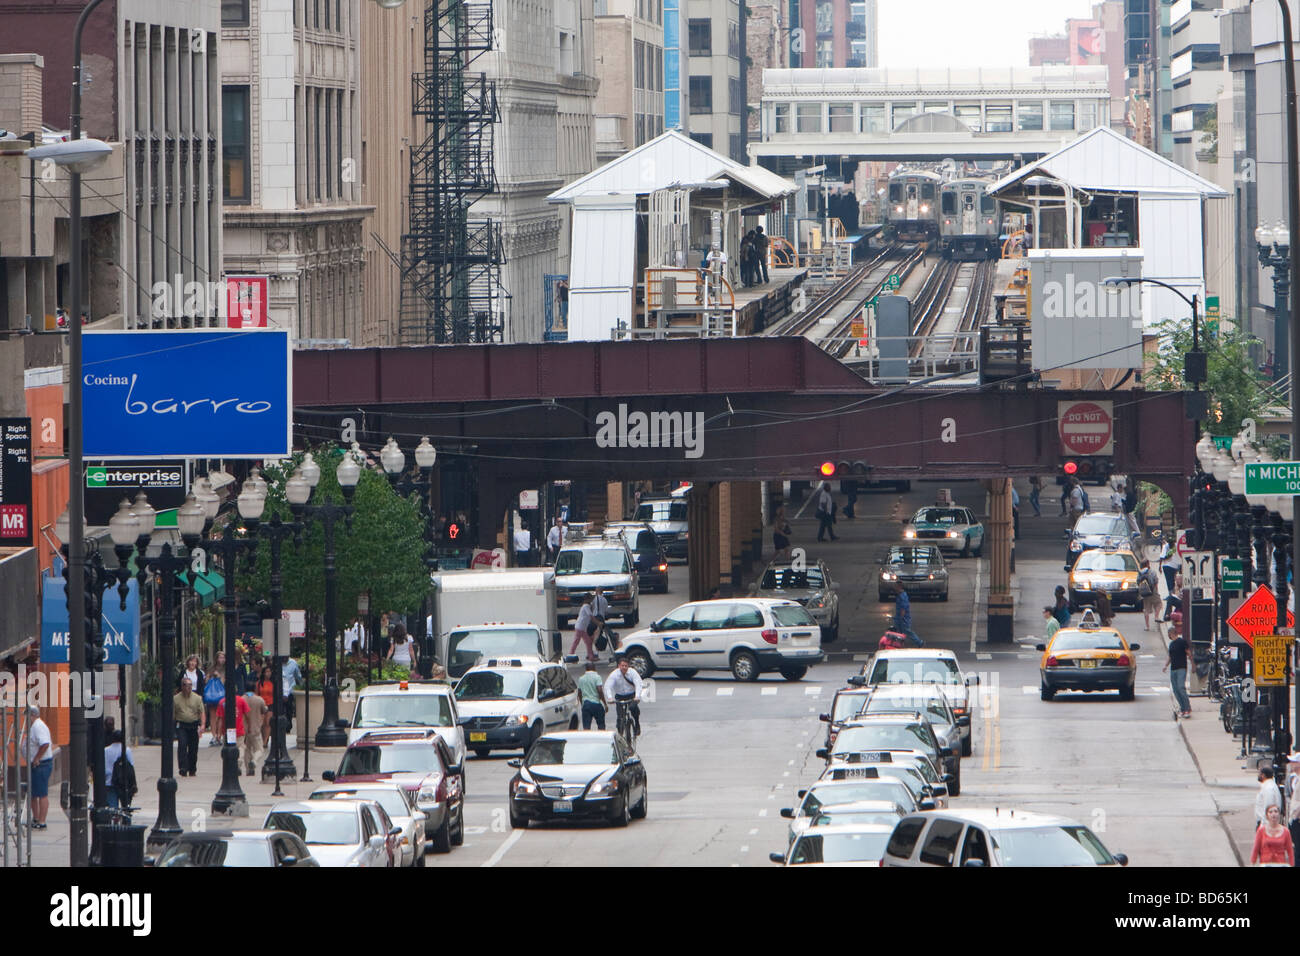 Chicago, Illinois.  Lake Street, The L, Elevated Railway, in Downtown Chicago's Loop Area. Stock Photo